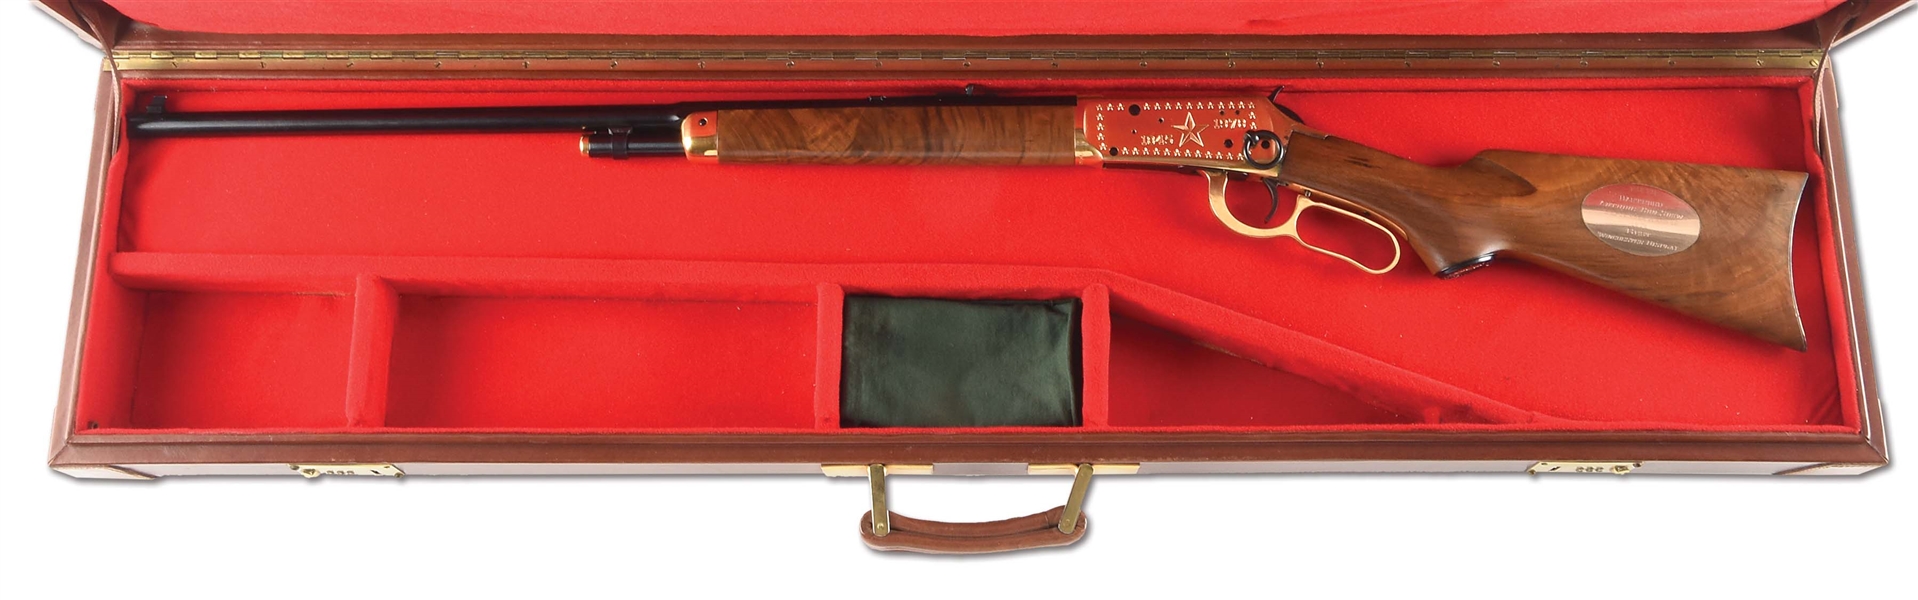 (M) CASED WINCHESTER MODEL 94 LONE STAR COMMEMORATIVE LEVER ACTION RIFLE.